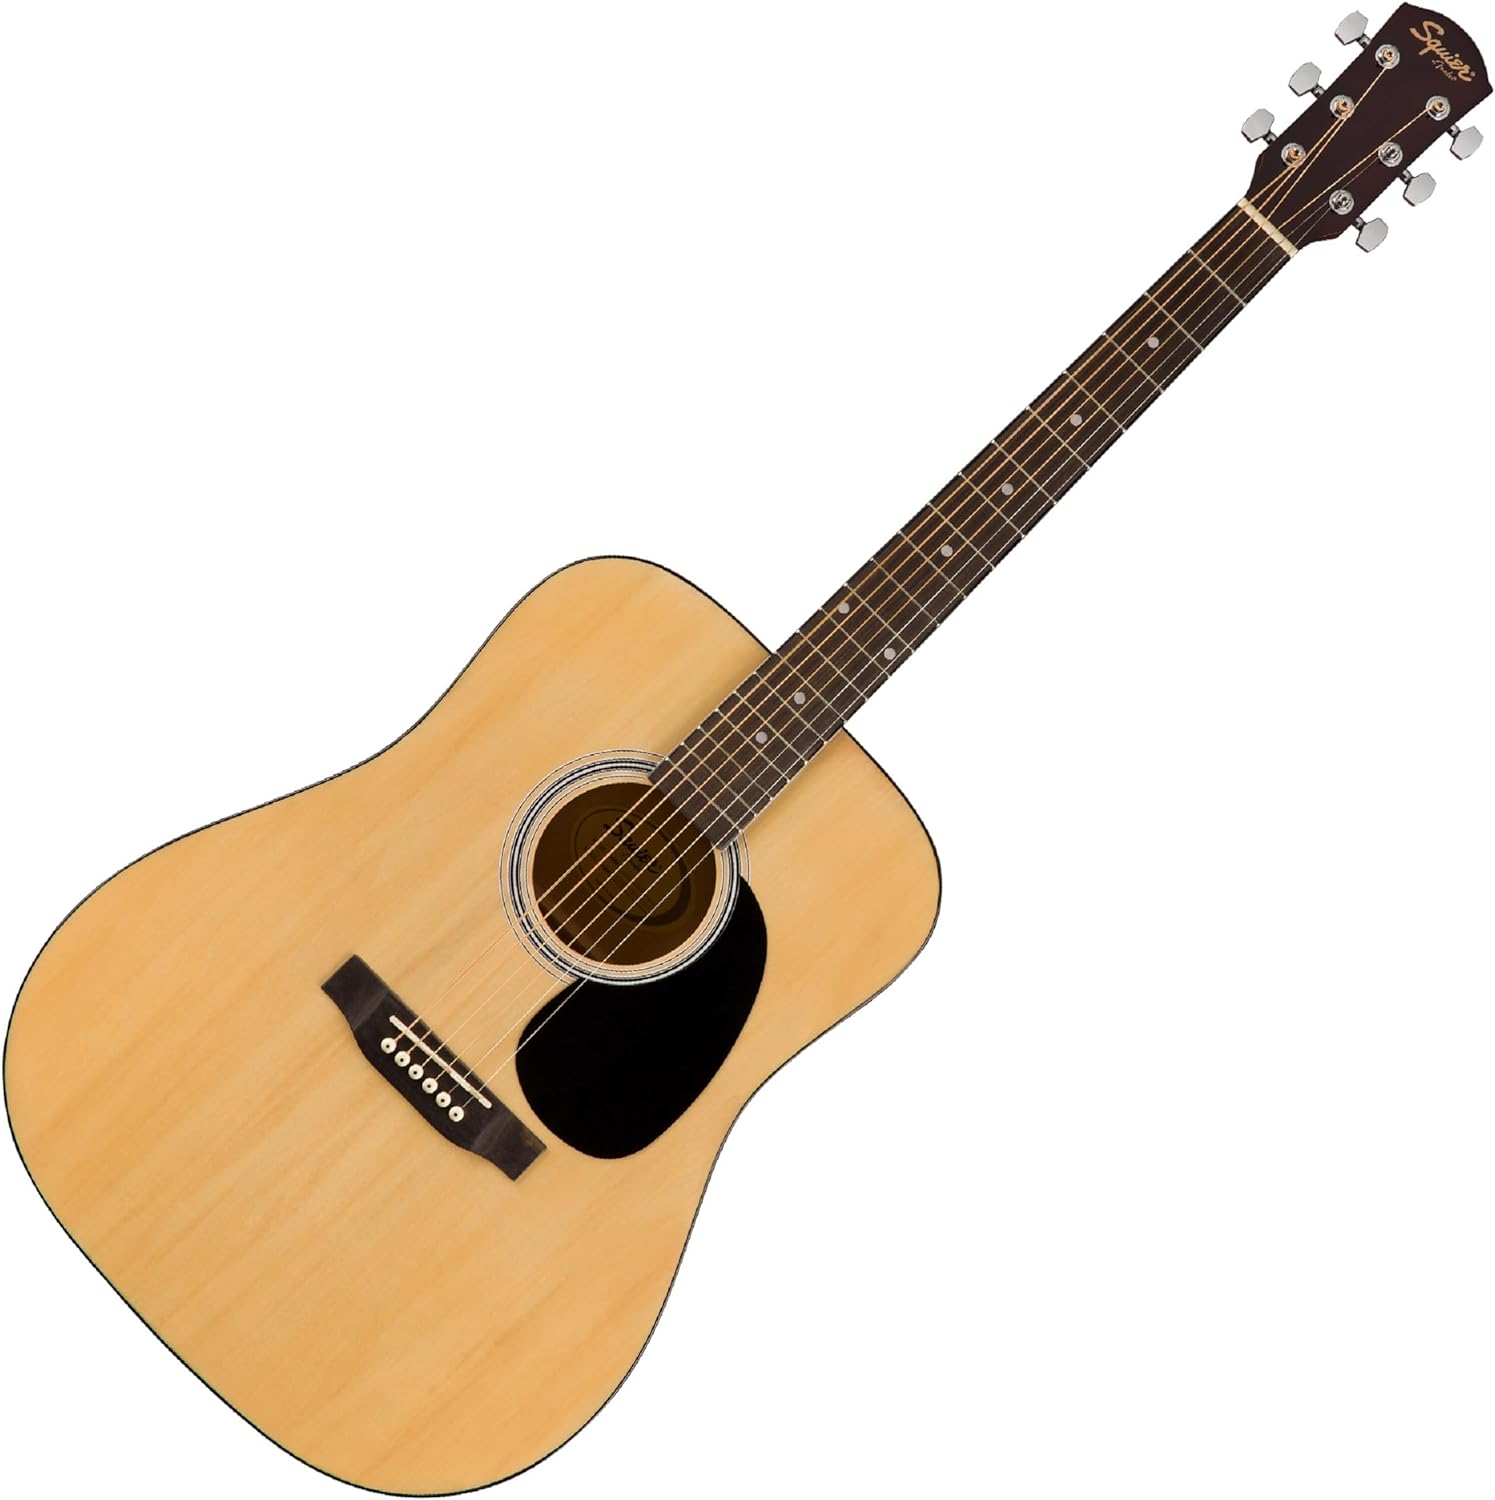 Squier by Fender Acoustic Guitar Dreadnought SA-150 Model